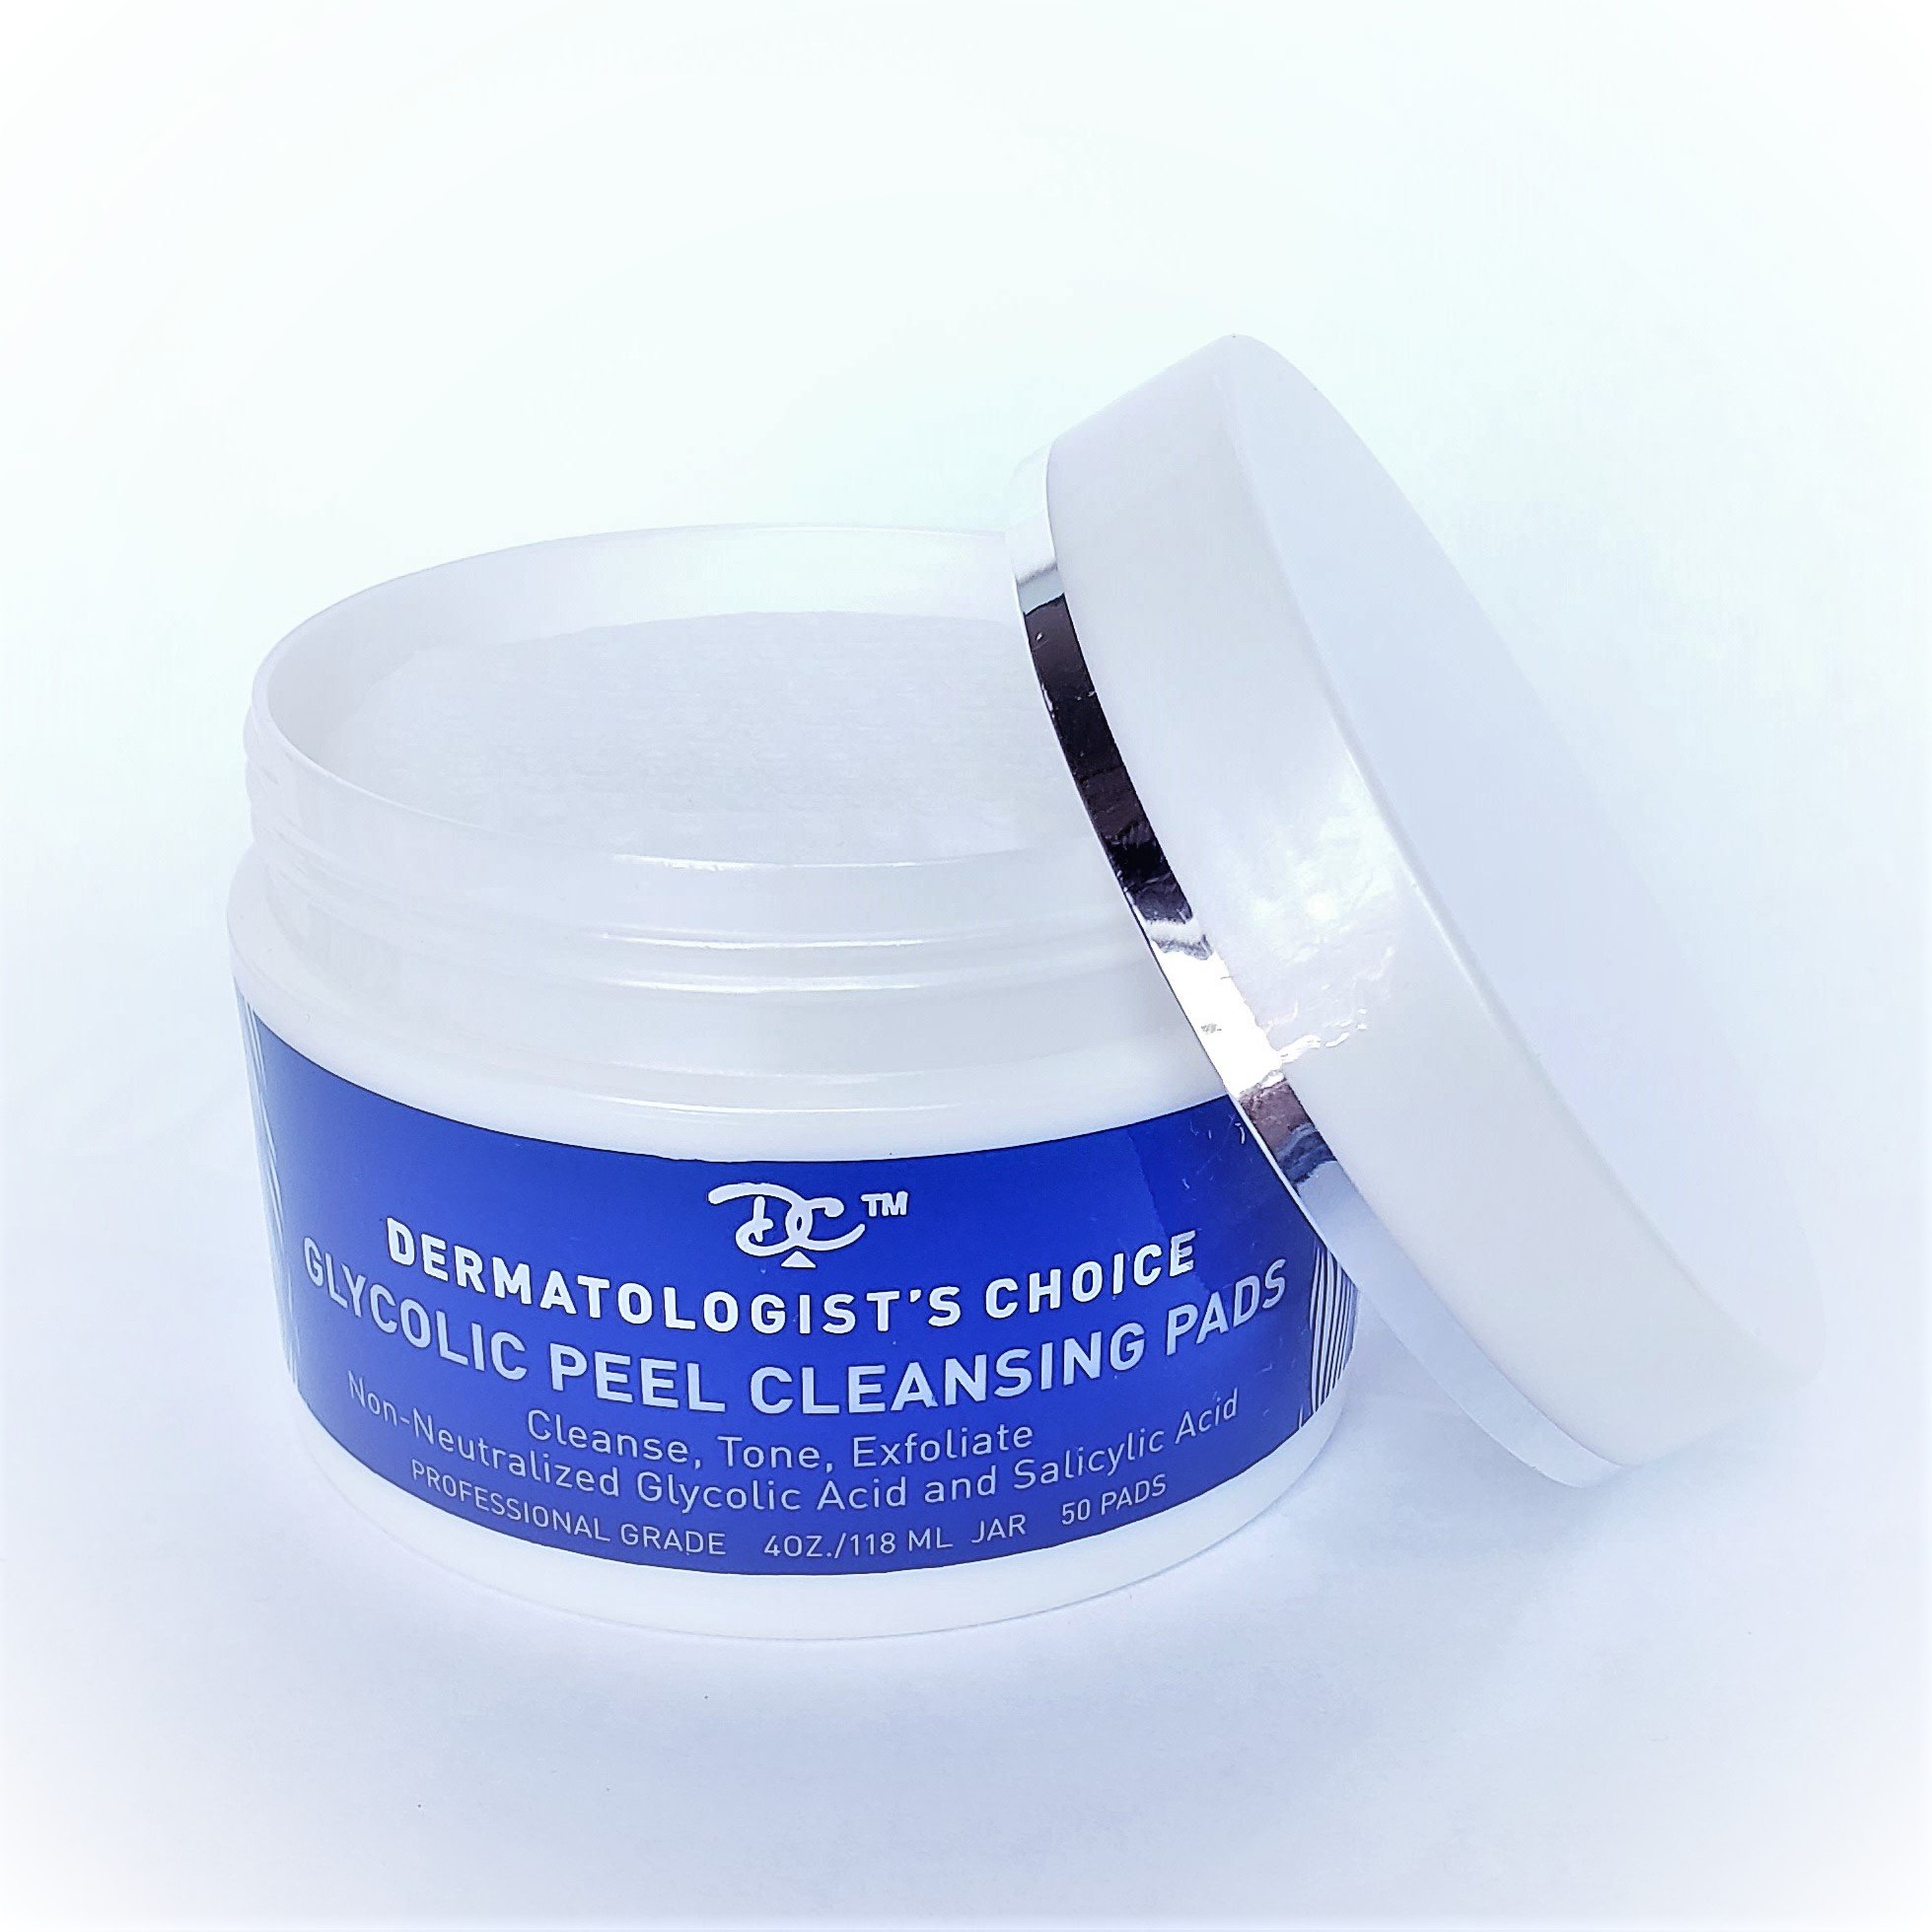 Dermatologist’s Choice Glycolic Peel Cleansing Pads